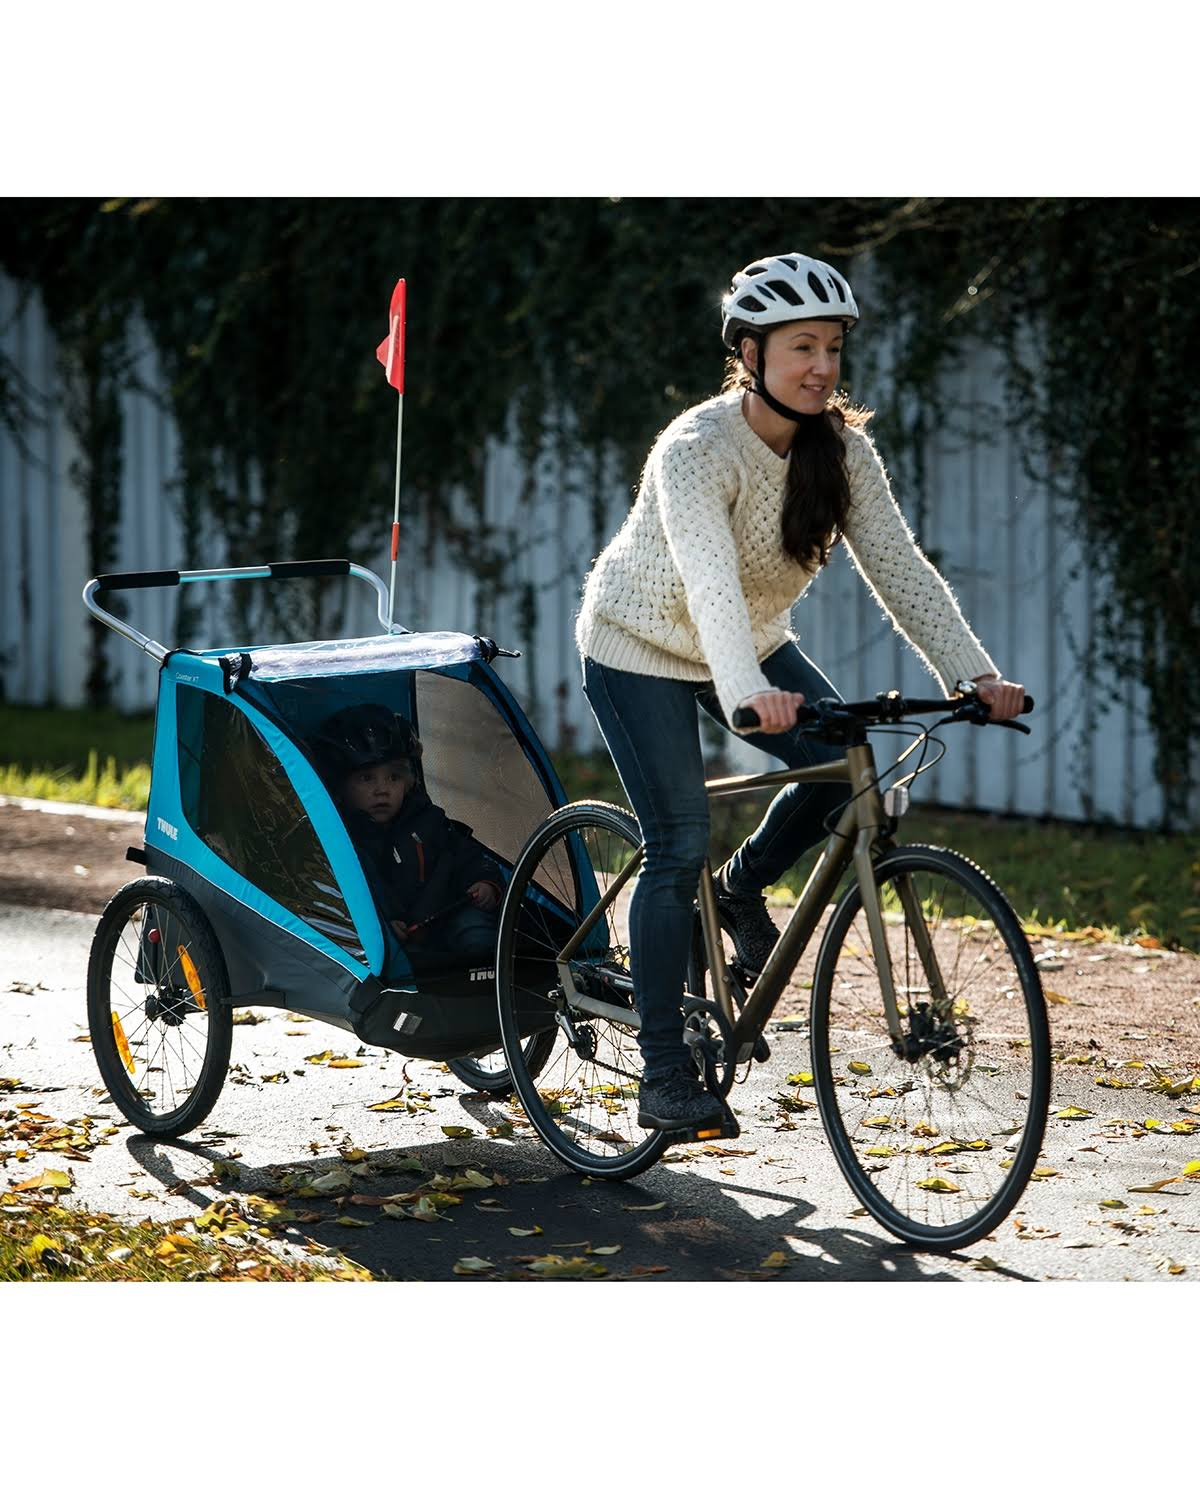 Thule Coaster XT Deluxe Bike Trailer in Blue at Nordstrom